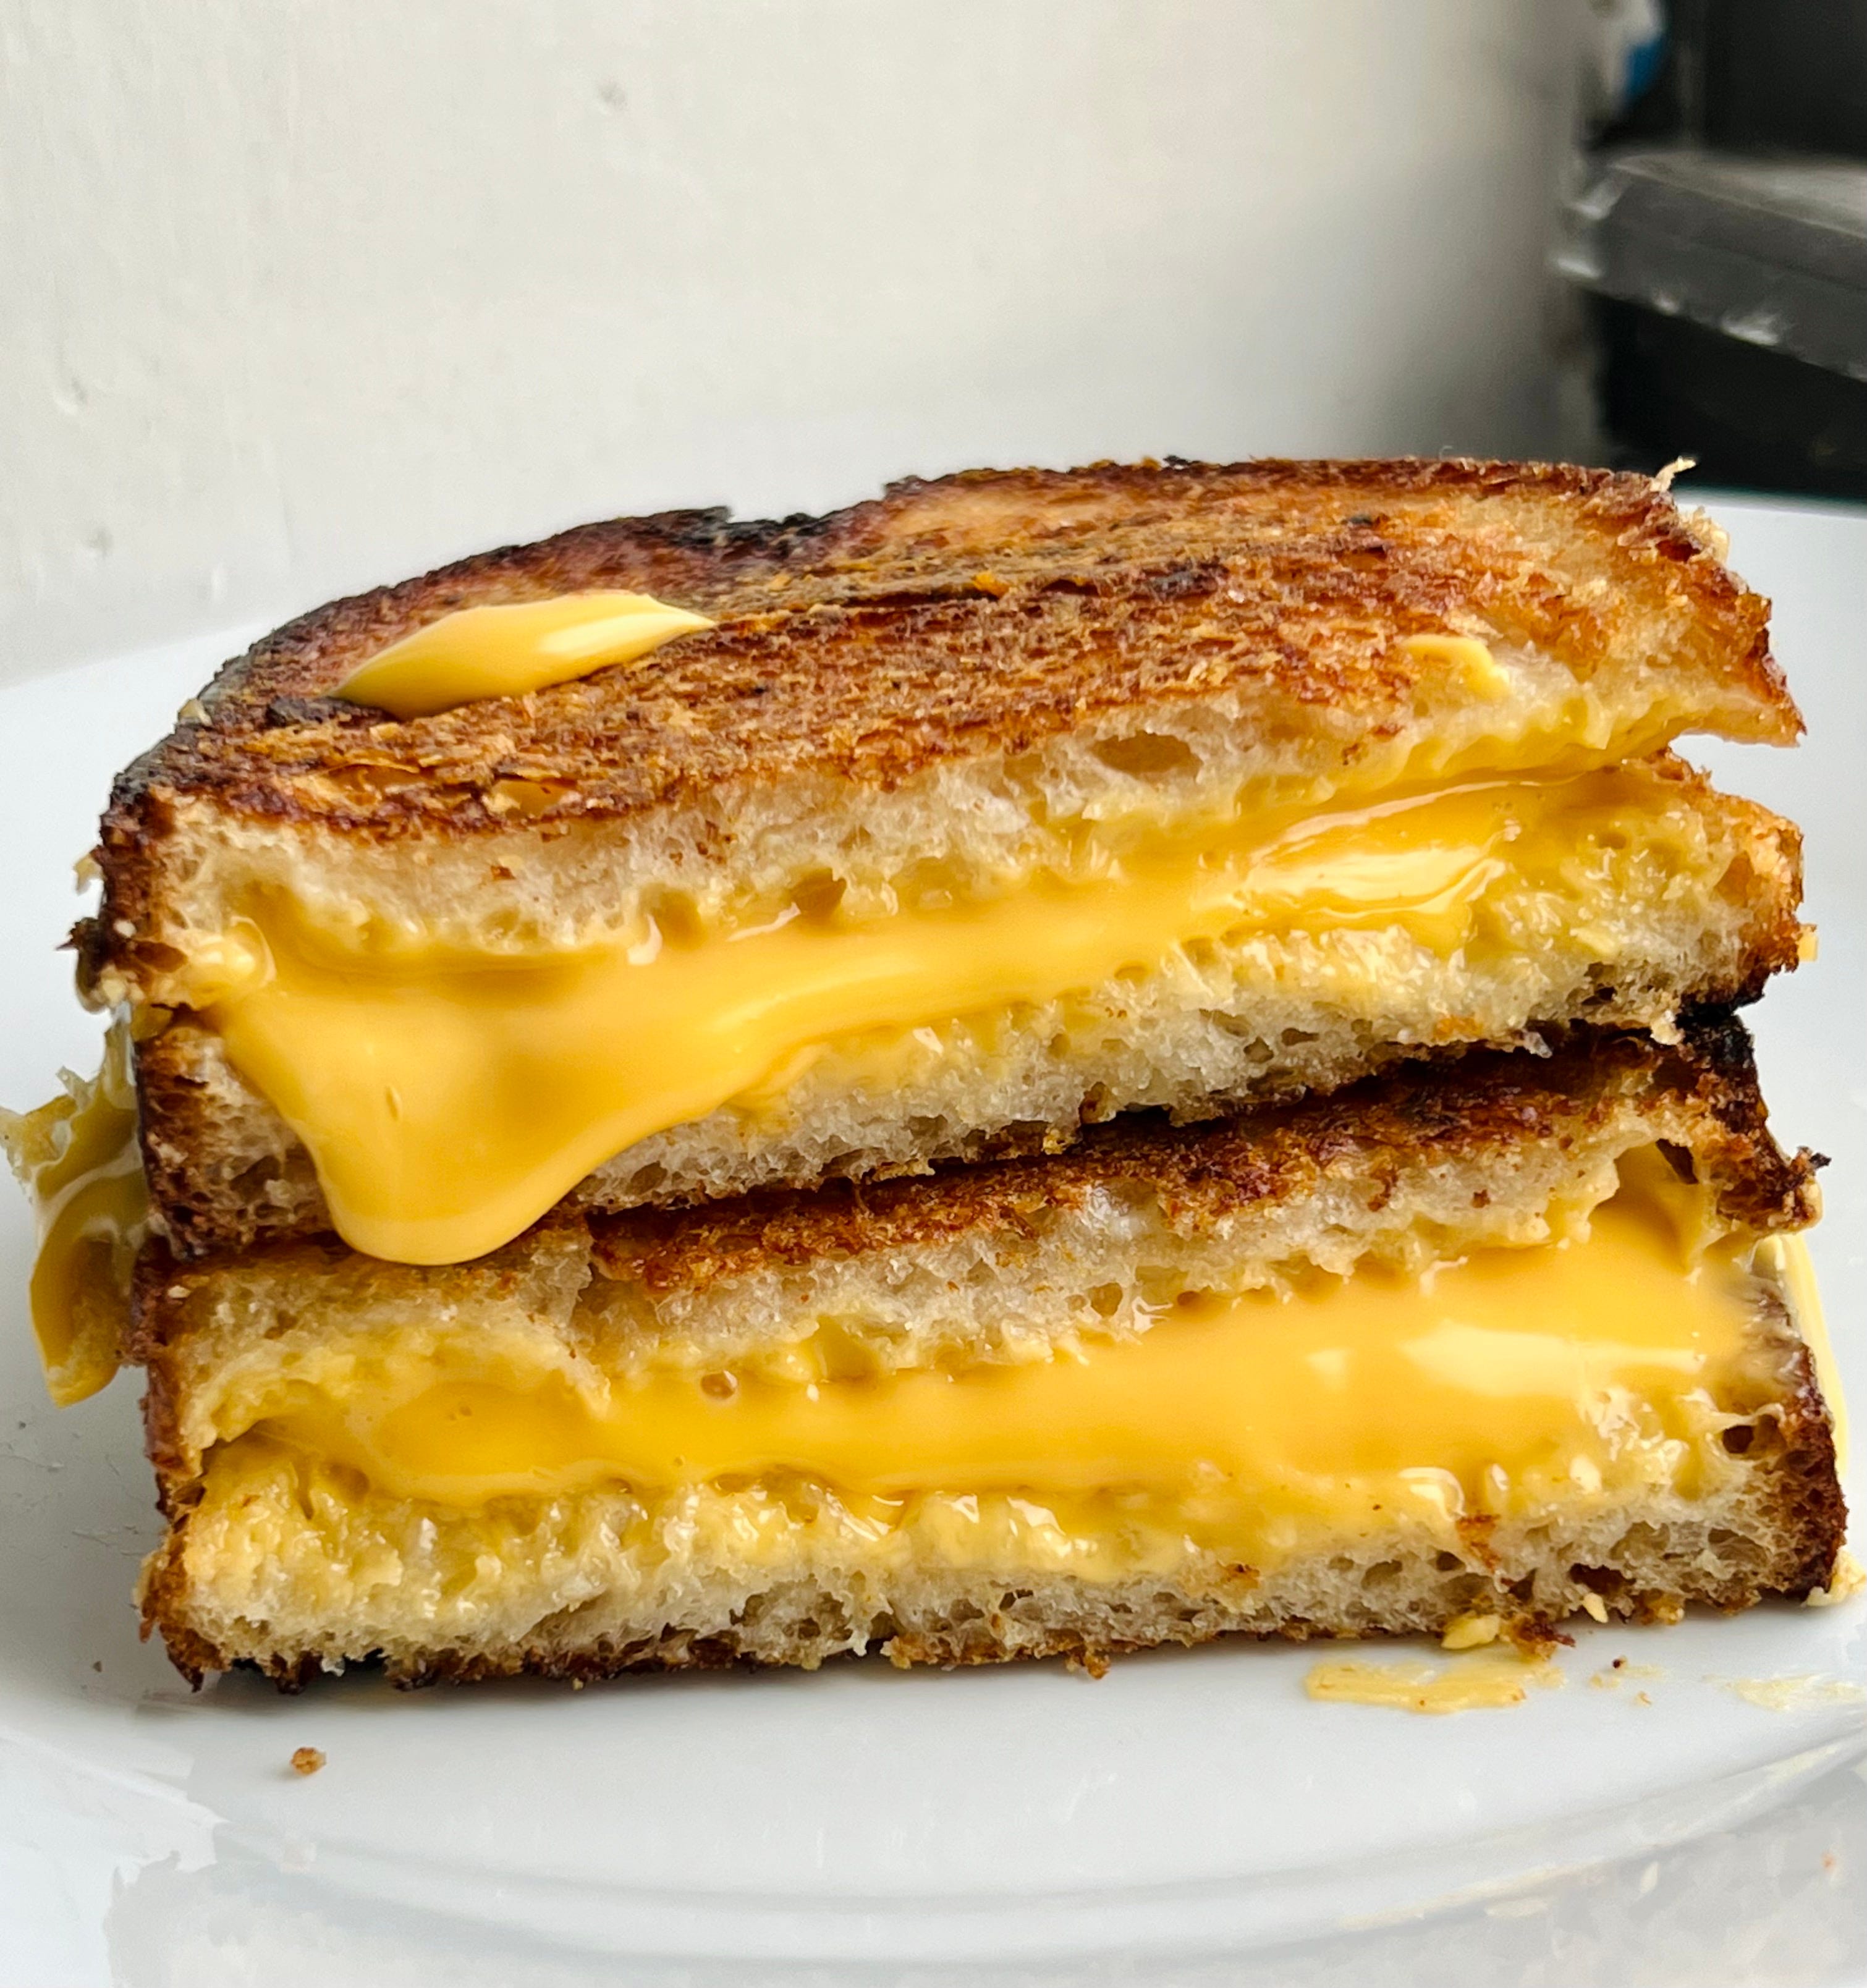 Grater Grilled Cheese - Gourmet grilled cheese sandwiches - Comfort food